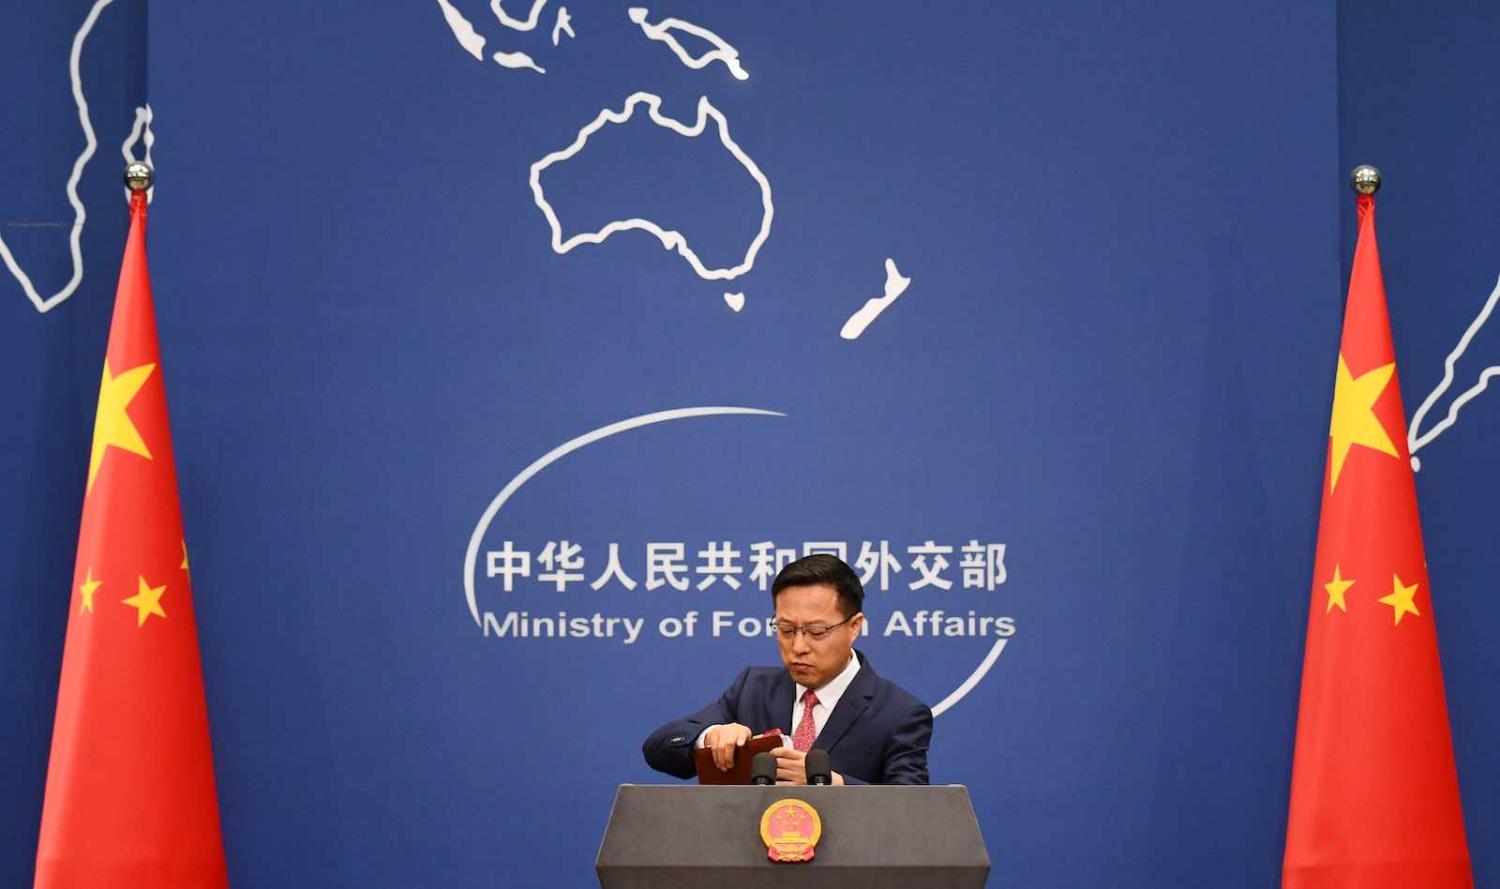 China’s Foreign Ministry spokesman Zhao Lijian (Greg Barker/AFP via Getty Images)